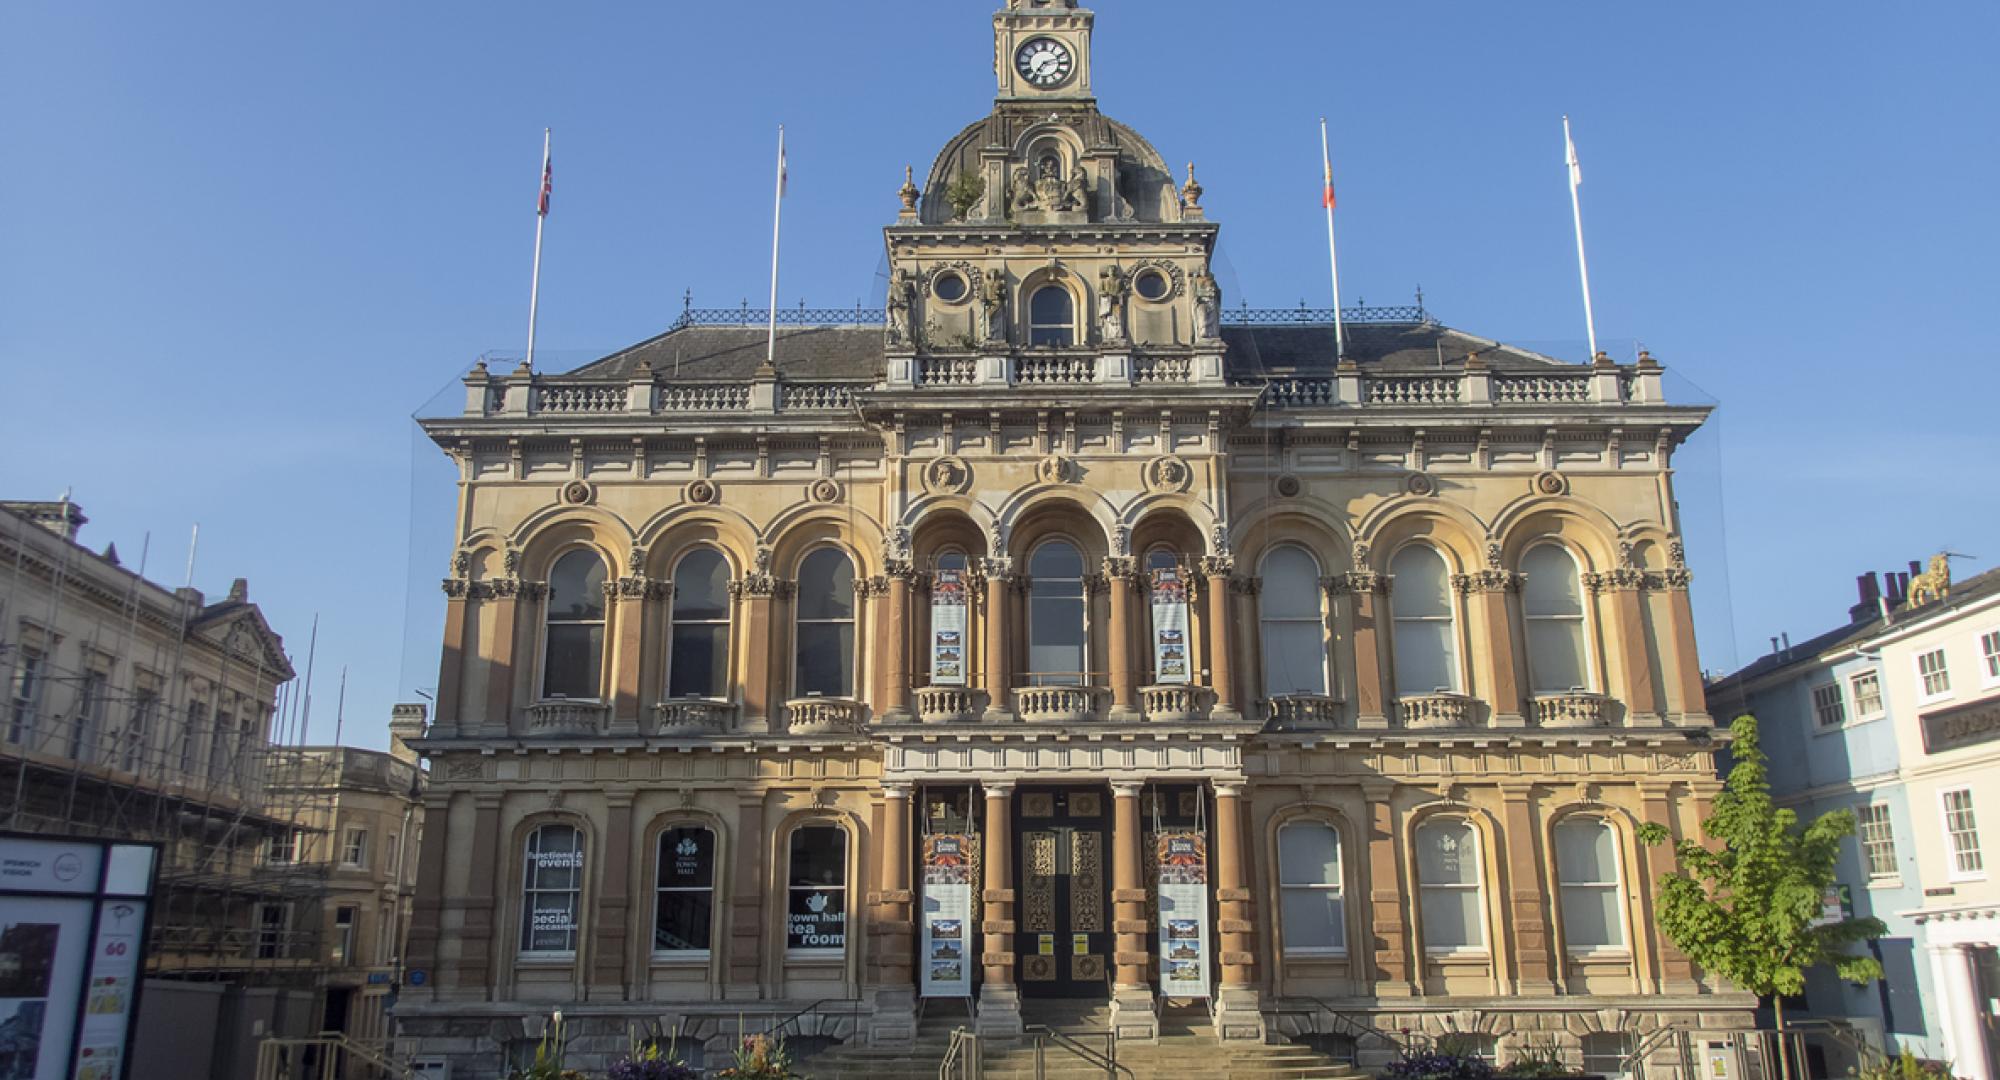 The Town Hall in Ipswich